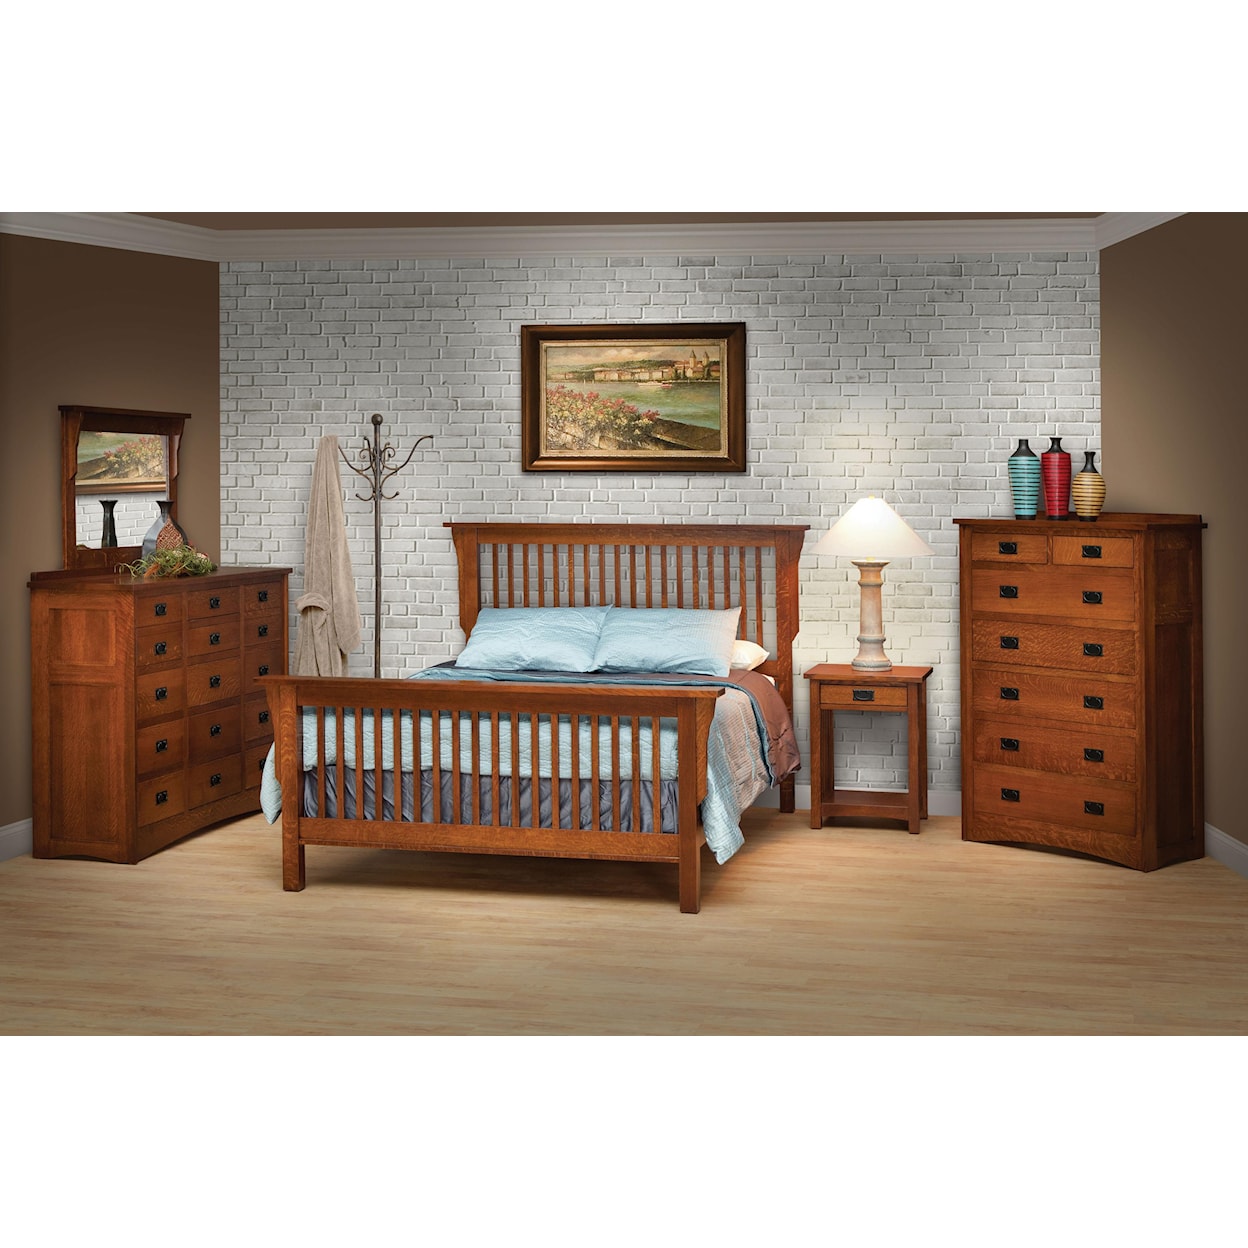 Daniel's Amish Mission Queen Frame Bed 